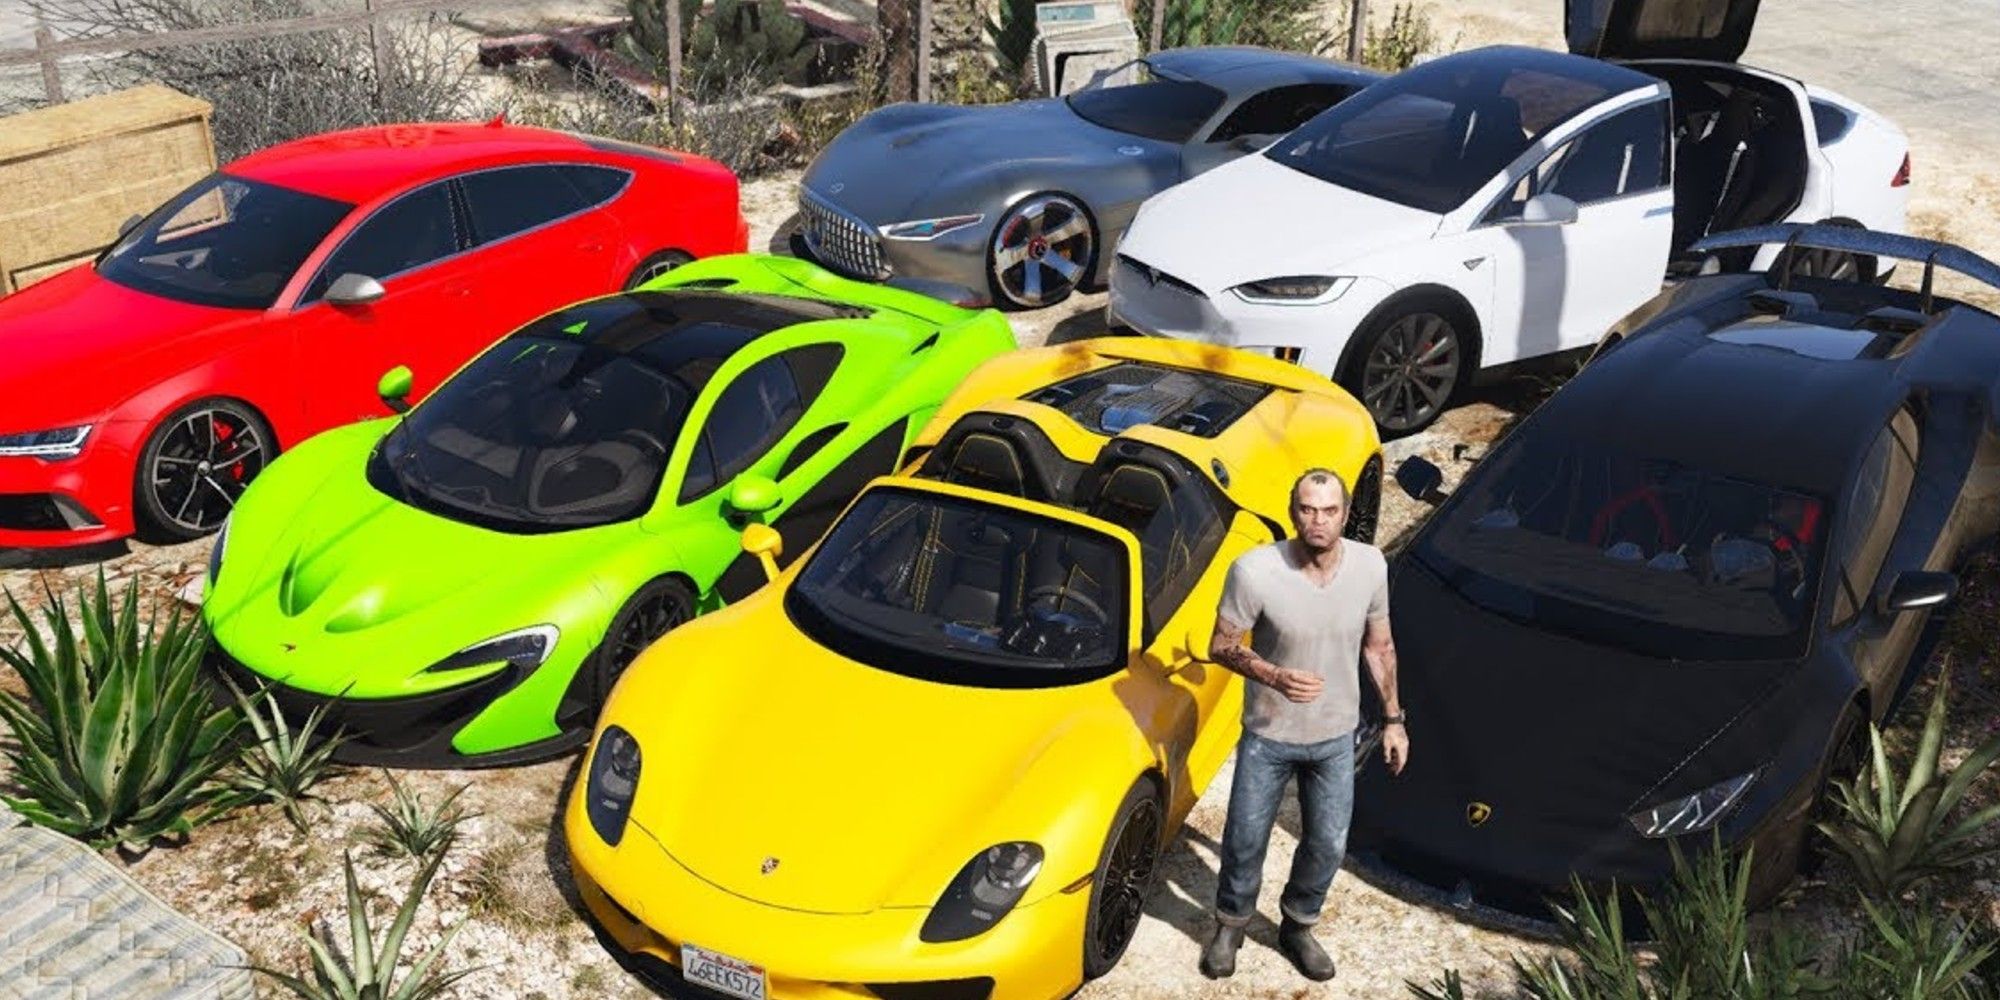 A selection of vehicles in Grand Theft Auto 5. A few of the cars are yellow, lime green, and red